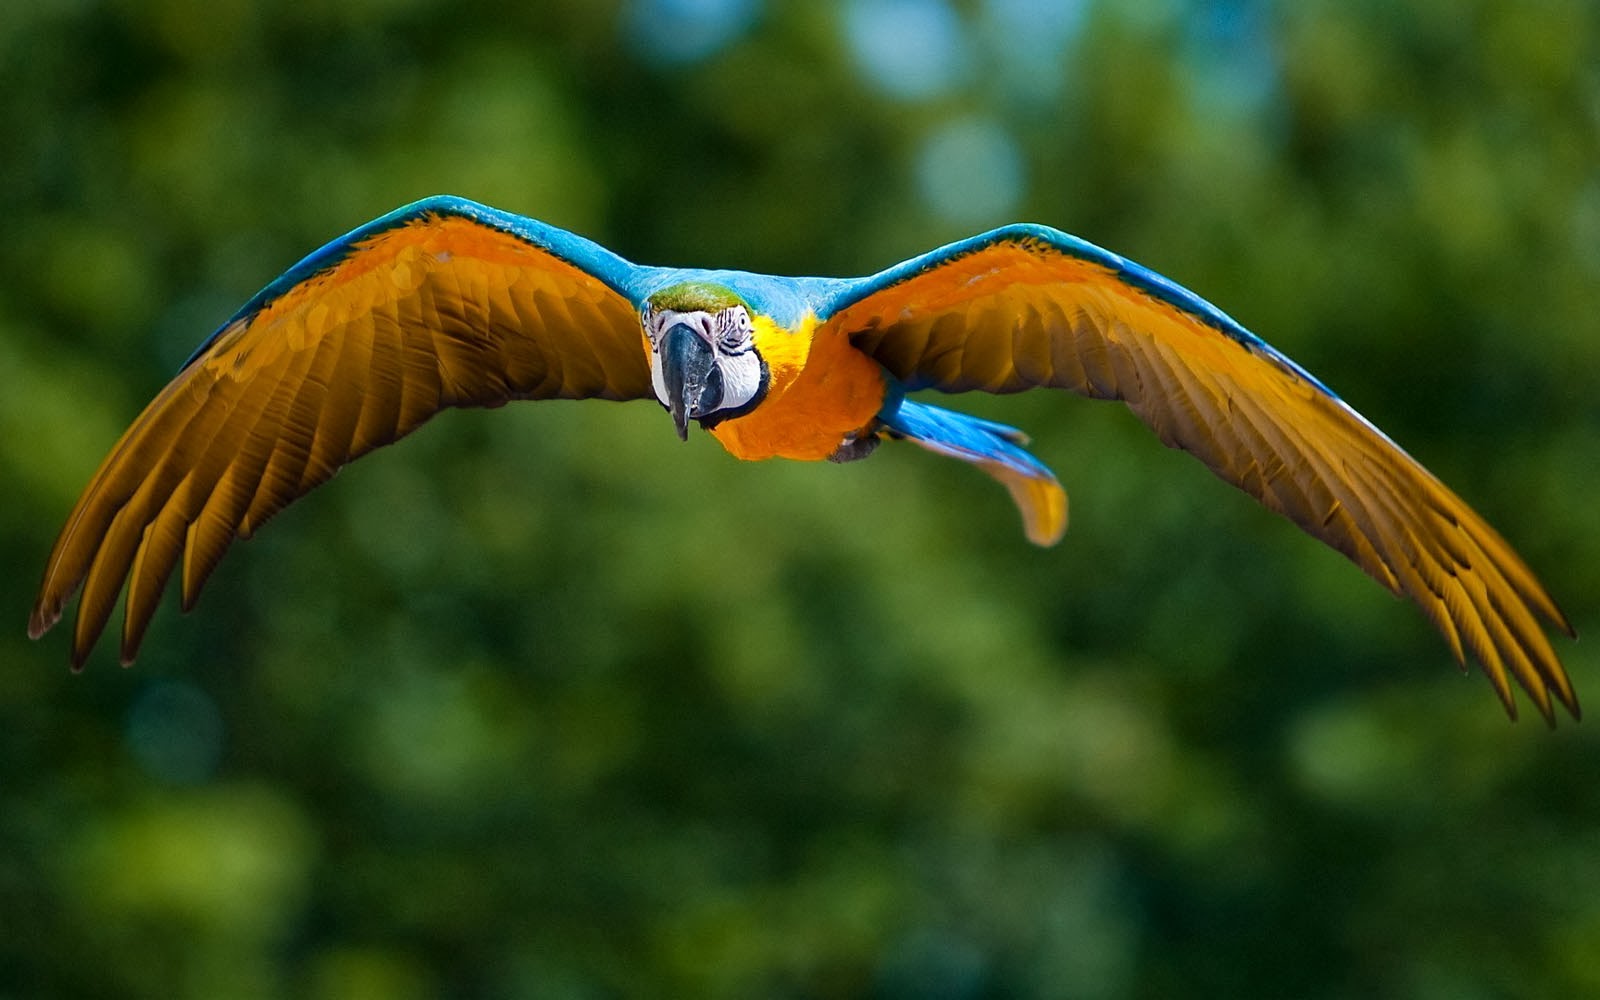 Tag Macaw Bird Wallpapers Backgrounds Photos Images and Pictures